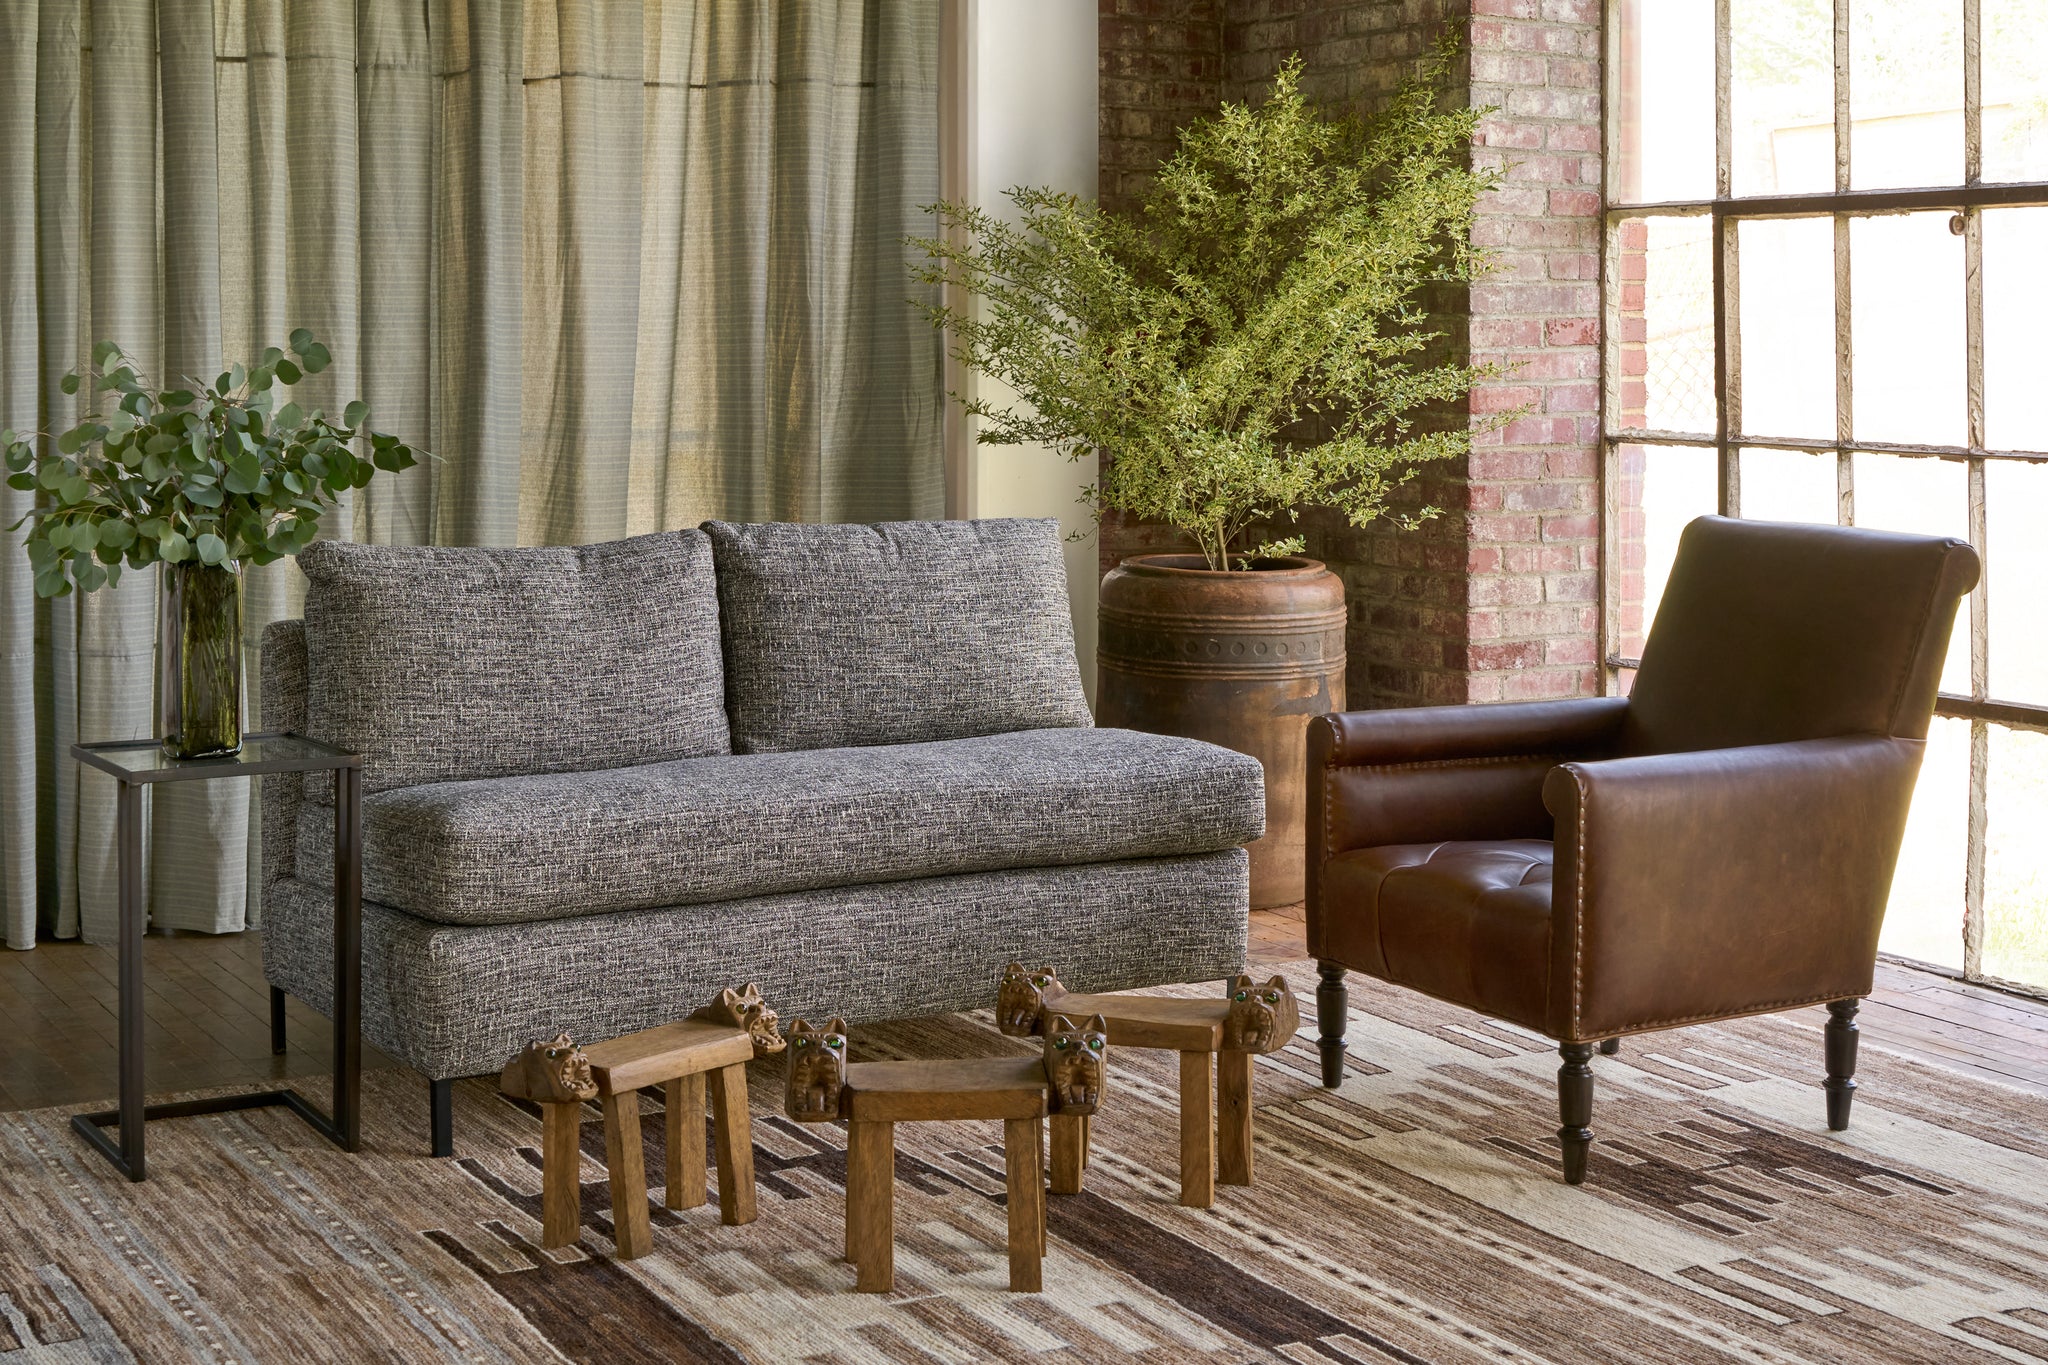  Armless loveseat in black and white fabric with a side table with flowers, a pot in the corner with a plant. A leather chair on the right and 3 wooden stools on a striped rug. Photographed in Spur Chocolate. 